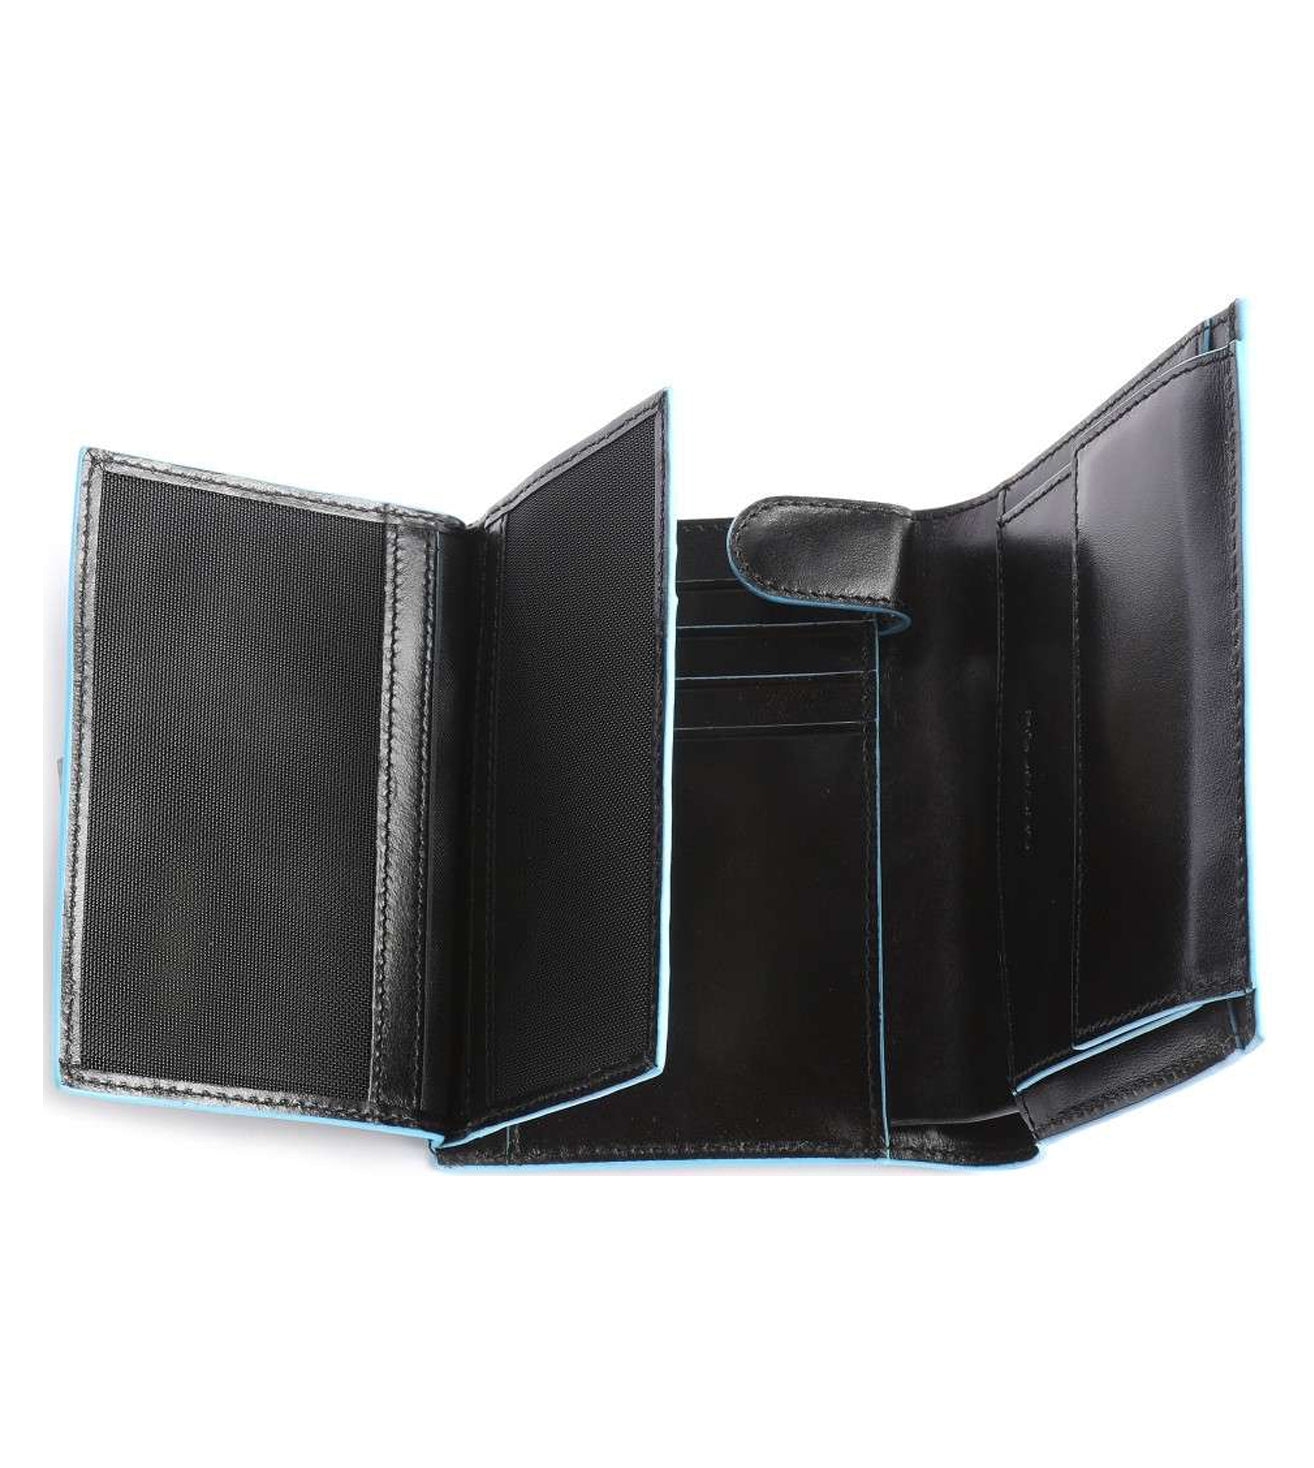 Piquadro Blue Square Men's wallet with money clip – Travel and Business  Store